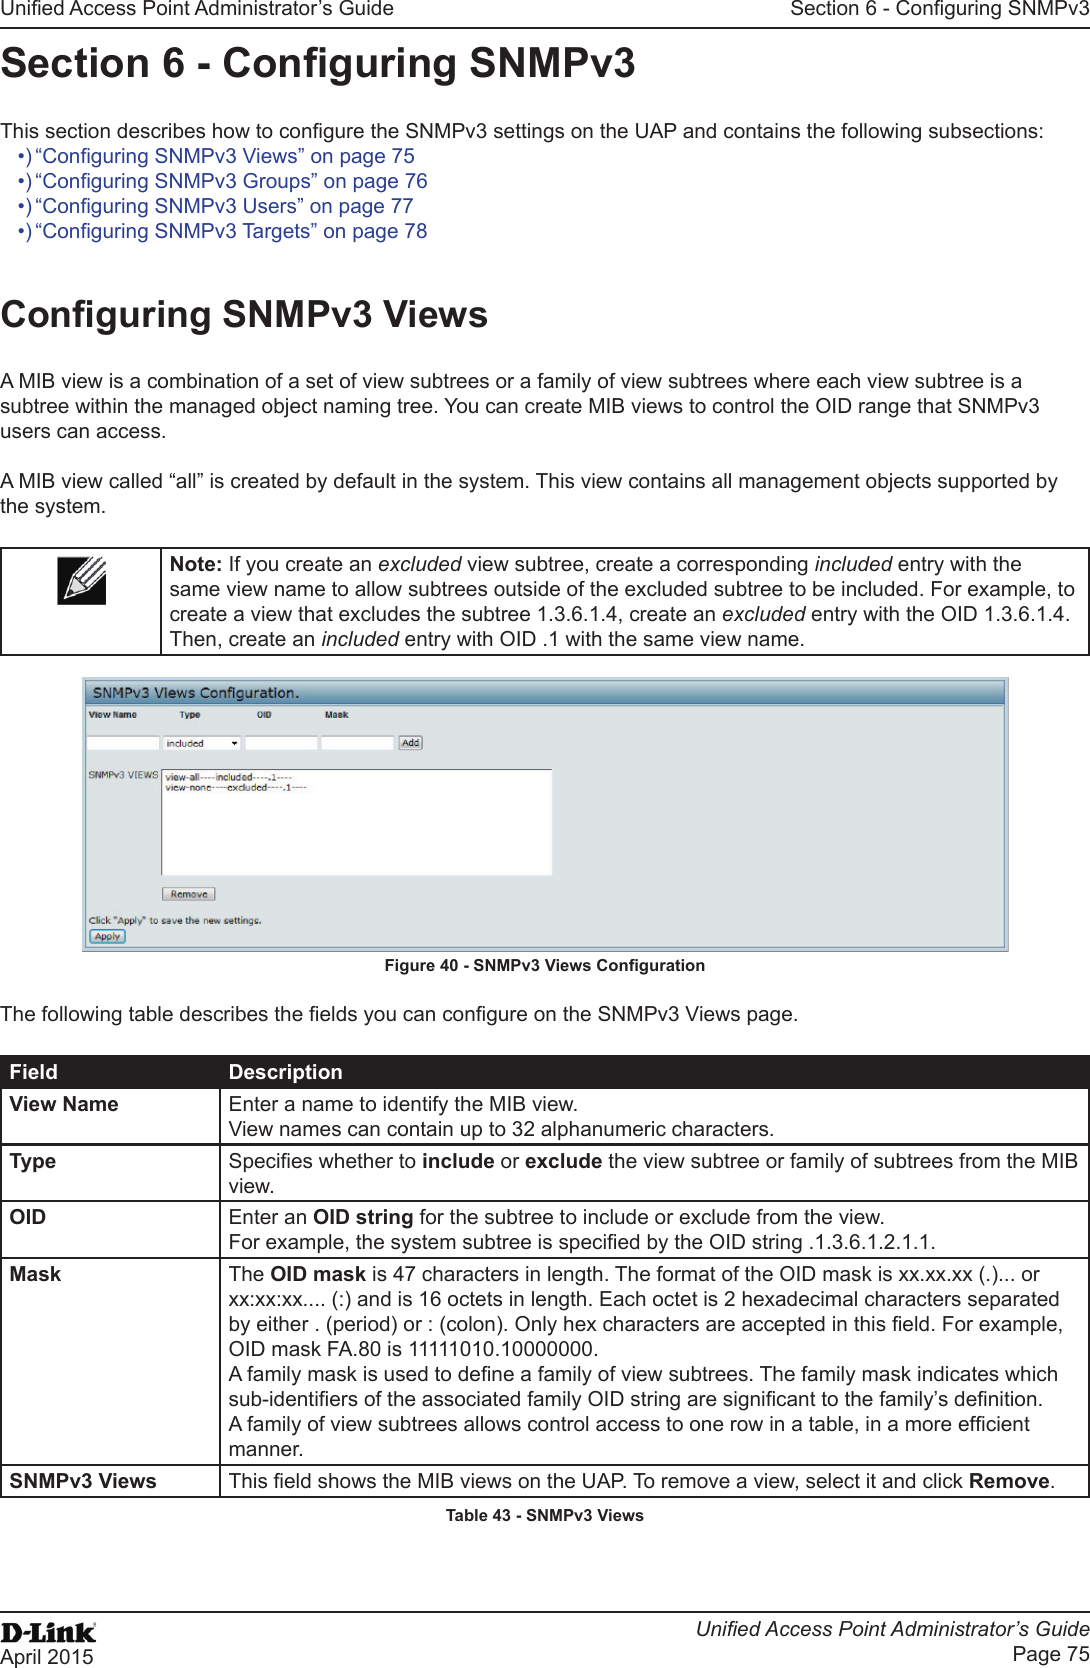 Unied Access Point Administrator’s GuideUnied Access Point Administrator’s GuidePage 75April 2015Section 6 - Conguring SNMPv3Section 6 - Conguring SNMPv3This section describes how to congure the SNMPv3 settings on the UAP and contains the following subsections:•) “Conguring SNMPv3 Views” on page 75•) “Conguring SNMPv3 Groups” on page 76•) “Conguring SNMPv3 Users” on page 77•) “Conguring SNMPv3 Targets” on page 78Conguring SNMPv3 ViewsA MIB view is a combination of a set of view subtrees or a family of view subtrees where each view subtree is a subtree within the managed object naming tree. You can create MIB views to control the OID range that SNMPv3 users can access.A MIB view called “all” is created by default in the system. This view contains all management objects supported by the system.Note: If you create an excluded view subtree, create a corresponding included entry with the same view name to allow subtrees outside of the excluded subtree to be included. For example, to create a view that excludes the subtree 1.3.6.1.4, create an excluded entry with the OID 1.3.6.1.4. Then, create an included entry with OID .1 with the same view name. Figure 40 - SNMPv3 Views CongurationThe following table describes the elds you can congure on the SNMPv3 Views page.Field DescriptionView Name Enter a name to identify the MIB view. View names can contain up to 32 alphanumeric characters.Type Species whether to include or exclude the view subtree or family of subtrees from the MIB view.OID Enter an OID string for the subtree to include or exclude from the view. For example, the system subtree is specied by the OID string .1.3.6.1.2.1.1.Mask The OID mask is 47 characters in length. The format of the OID mask is xx.xx.xx (.)... or xx:xx:xx.... (:) and is 16 octets in length. Each octet is 2 hexadecimal characters separated by either . (period) or : (colon). Only hex characters are accepted in this eld. For example, OID mask FA.80 is 11111010.10000000.A family mask is used to dene a family of view subtrees. The family mask indicates which sub-identiers of the associated family OID string are signicant to the family’s denition. A family of view subtrees allows control access to one row in a table, in a more efcient manner.SNMPv3 Views This eld shows the MIB views on the UAP. To remove a view, select it and click Remove.Table 43 - SNMPv3 Views